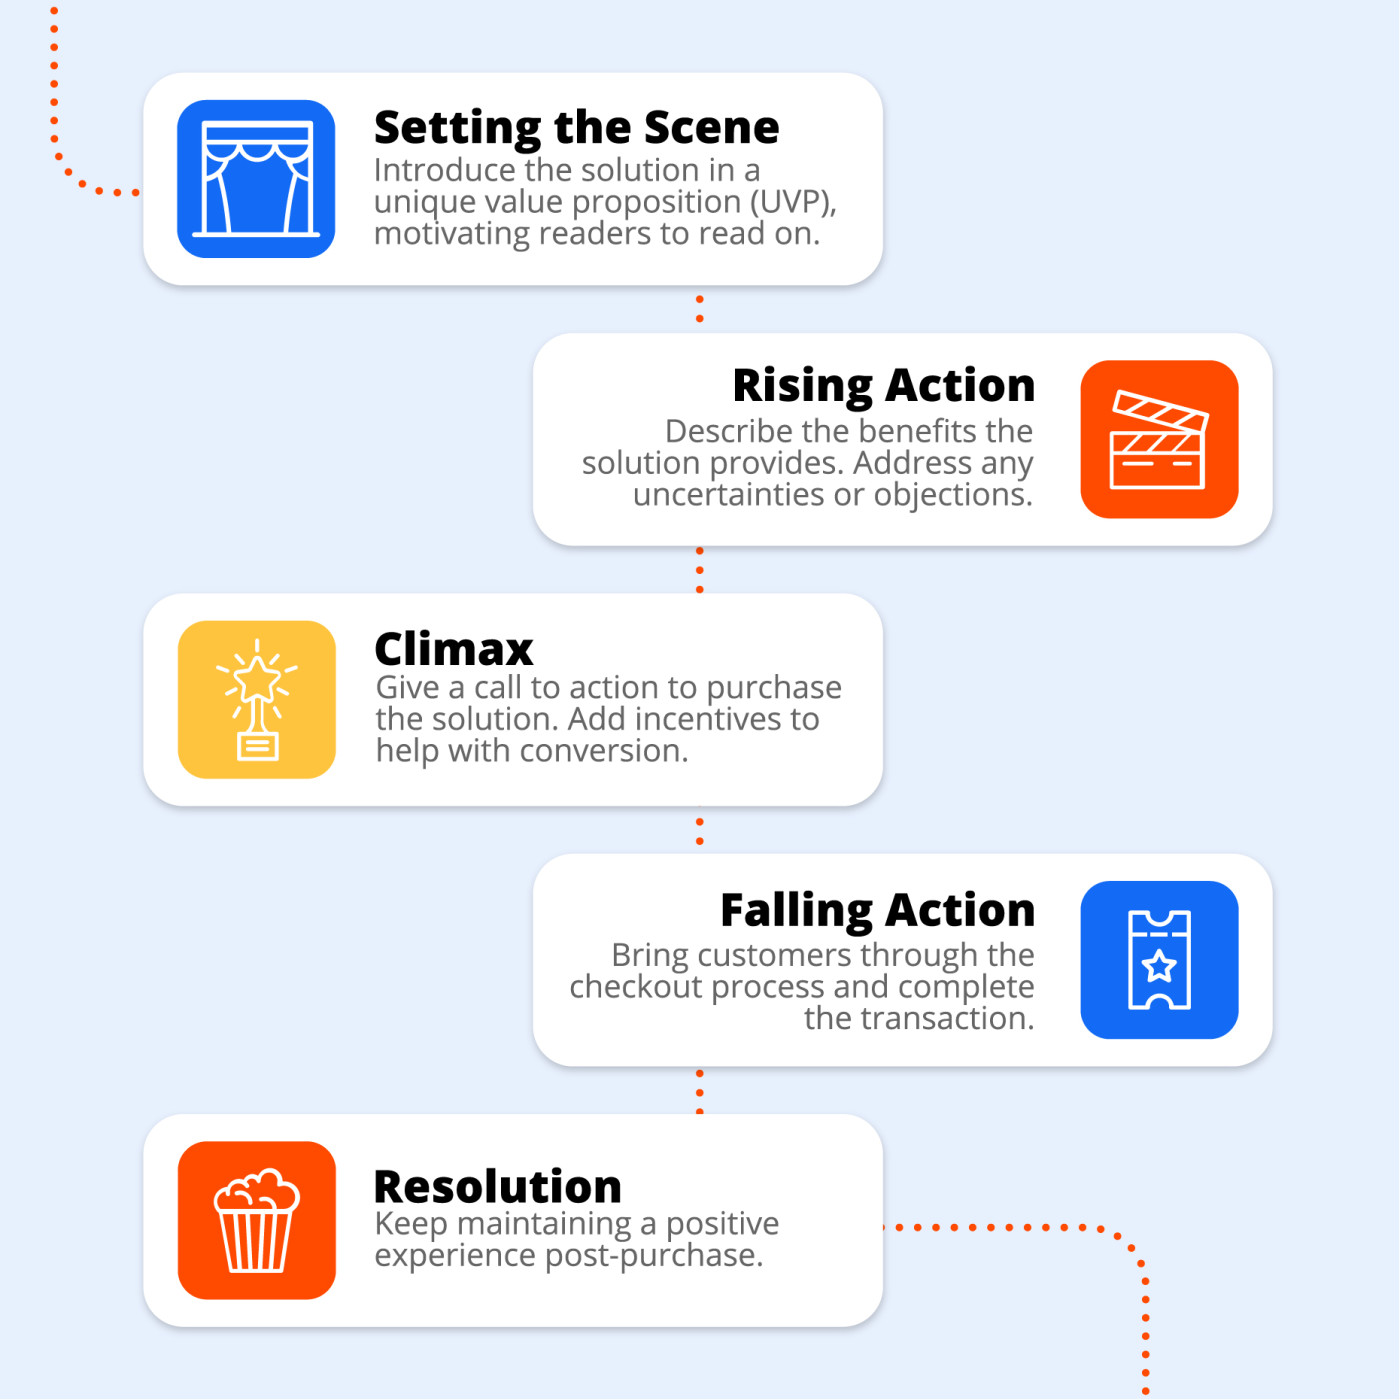 An infographic showing how a sales page can follow a narrative feel